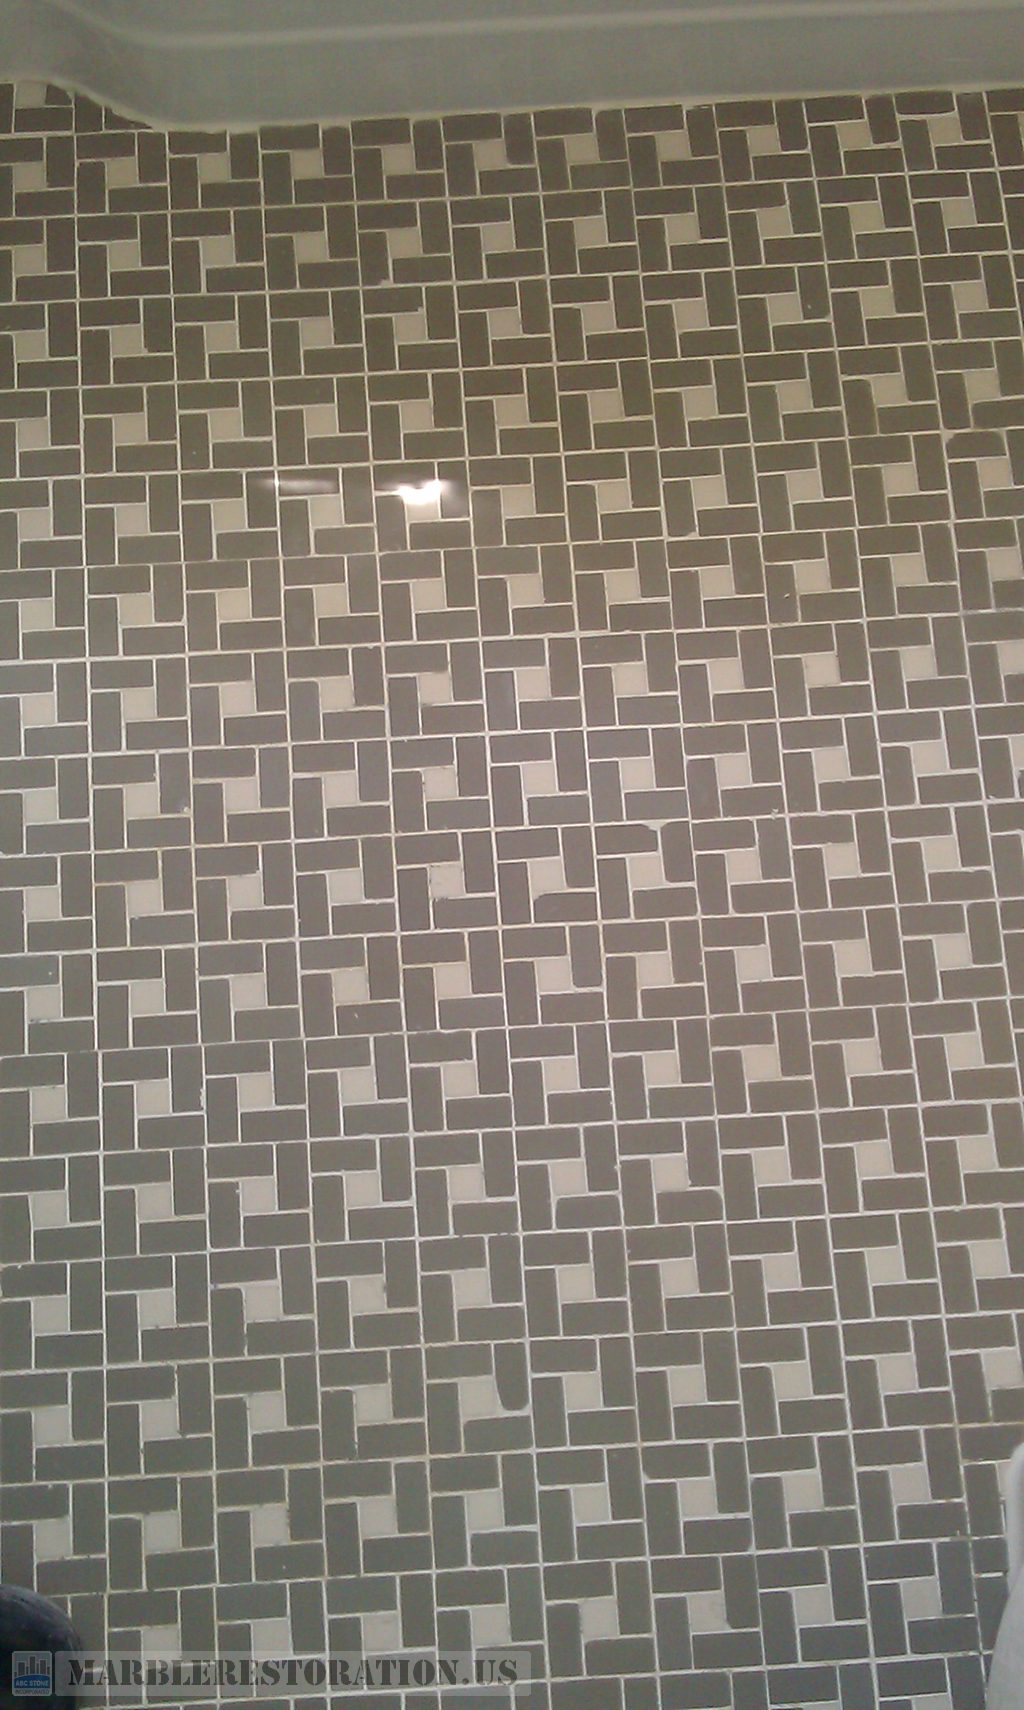 Ceramic Mosaic Wax Stripped Cleaned